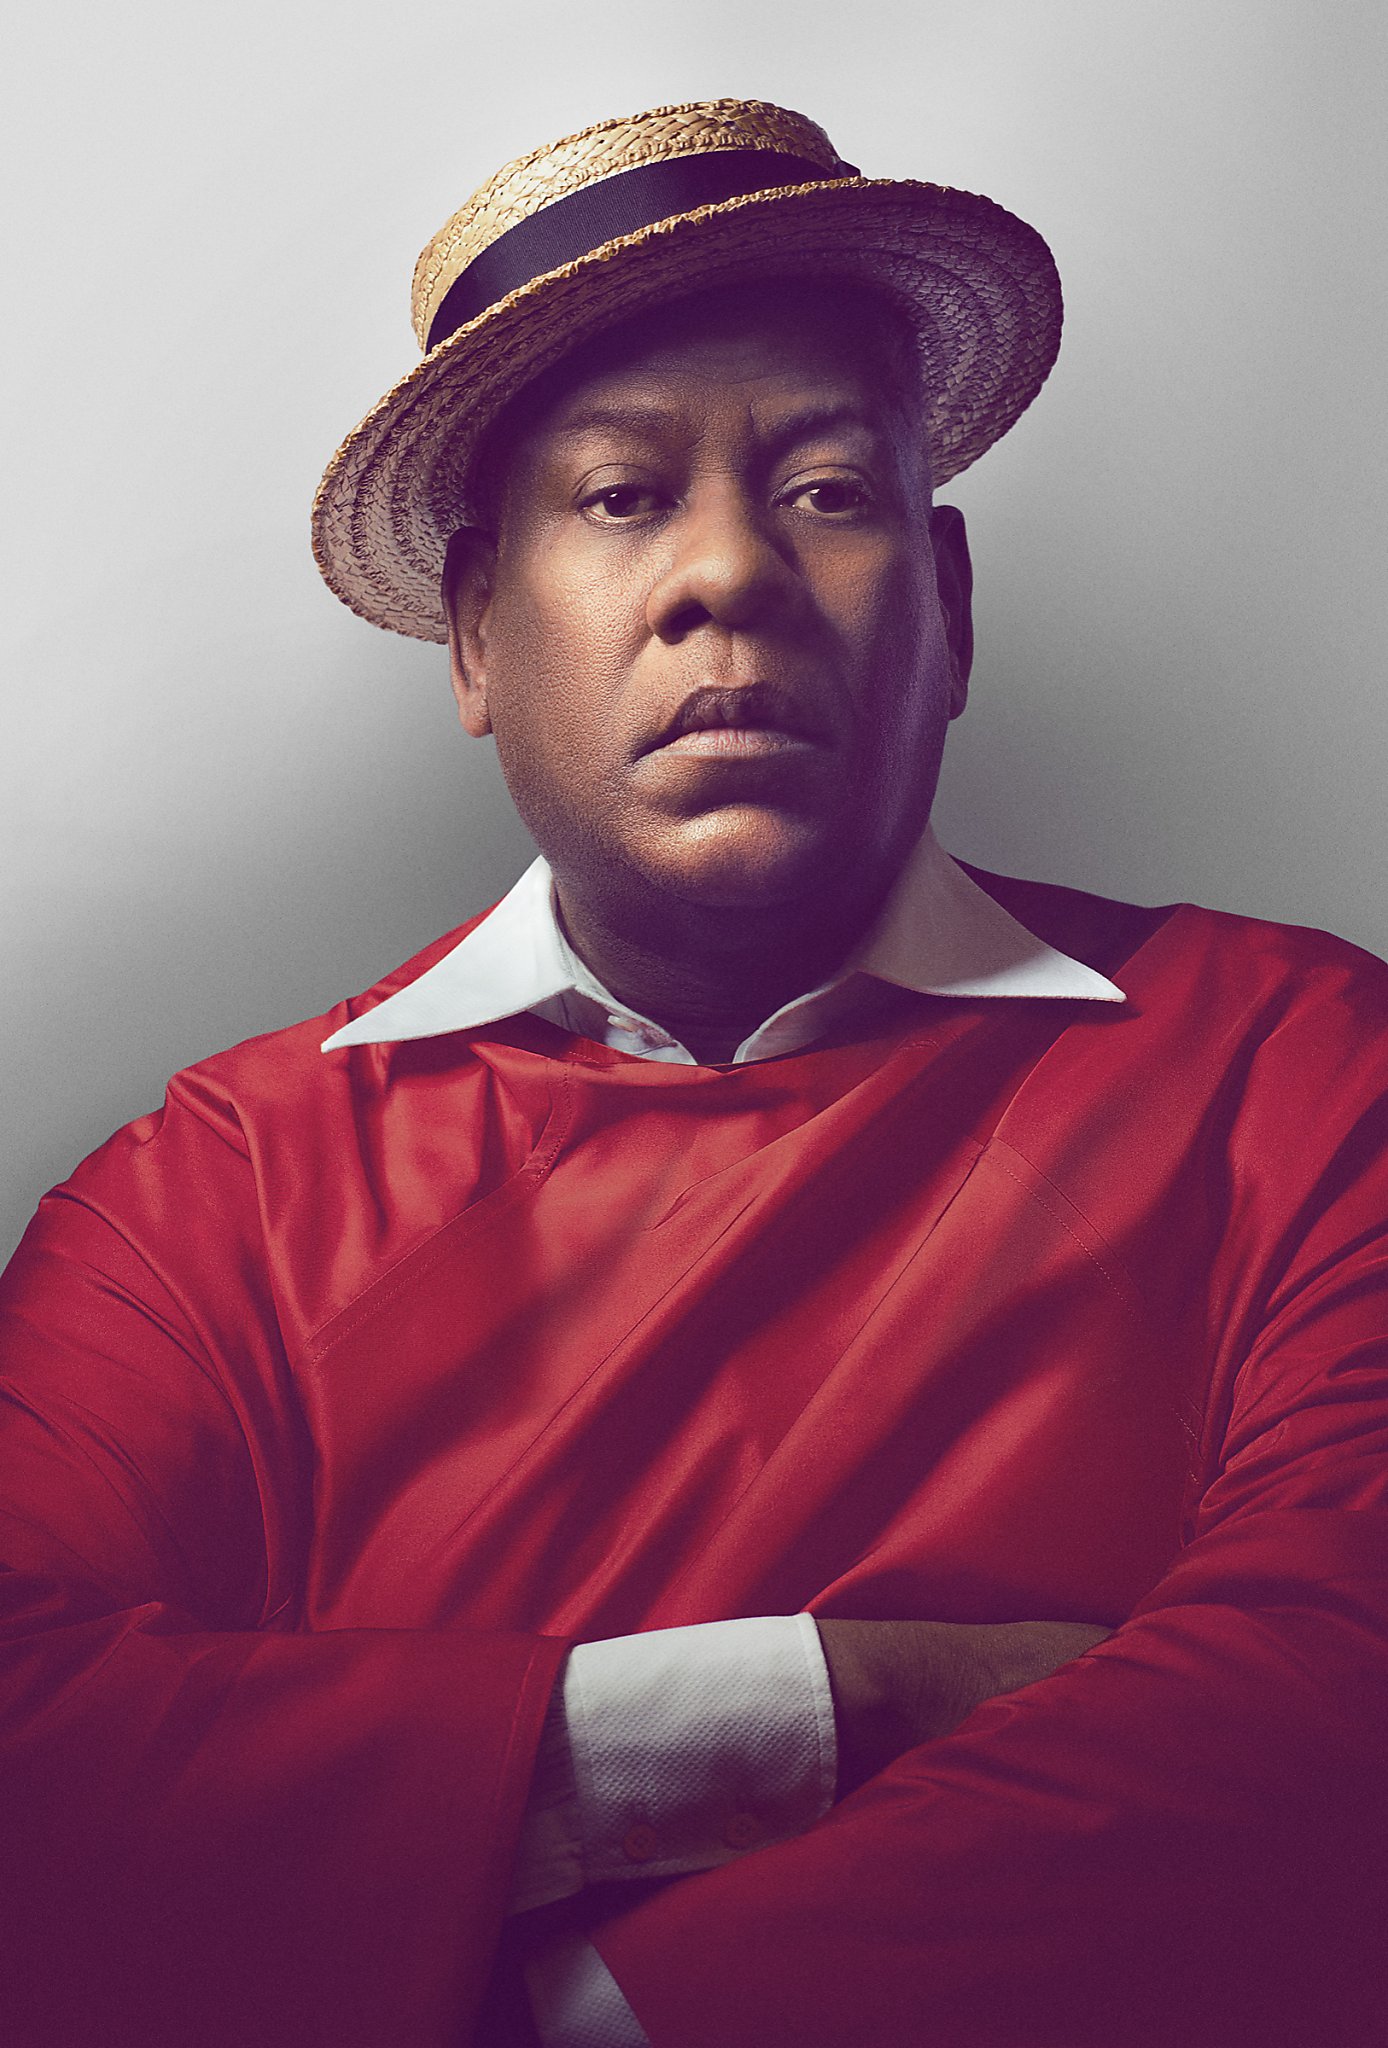 andre leon talley - photo #9